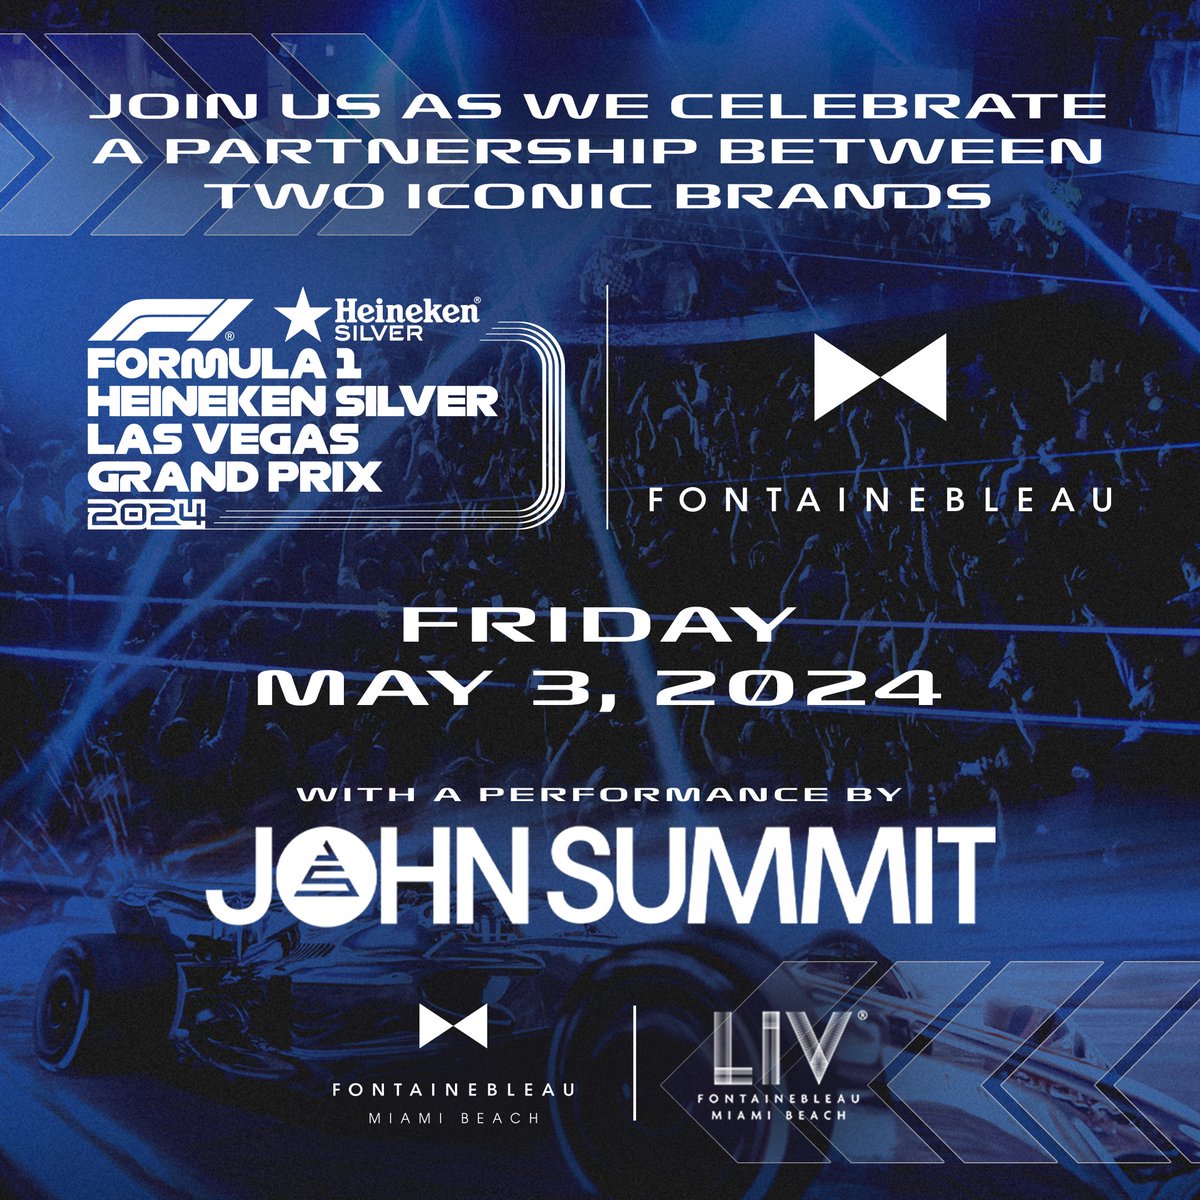 #F1 race week in Miami starts now! Join us @LIVmiami on May 3 to celebrate our new partnership with @fblasvegas. Get ready for a night with #LasVegasGP and @johnsummit. See you there🏁🎉